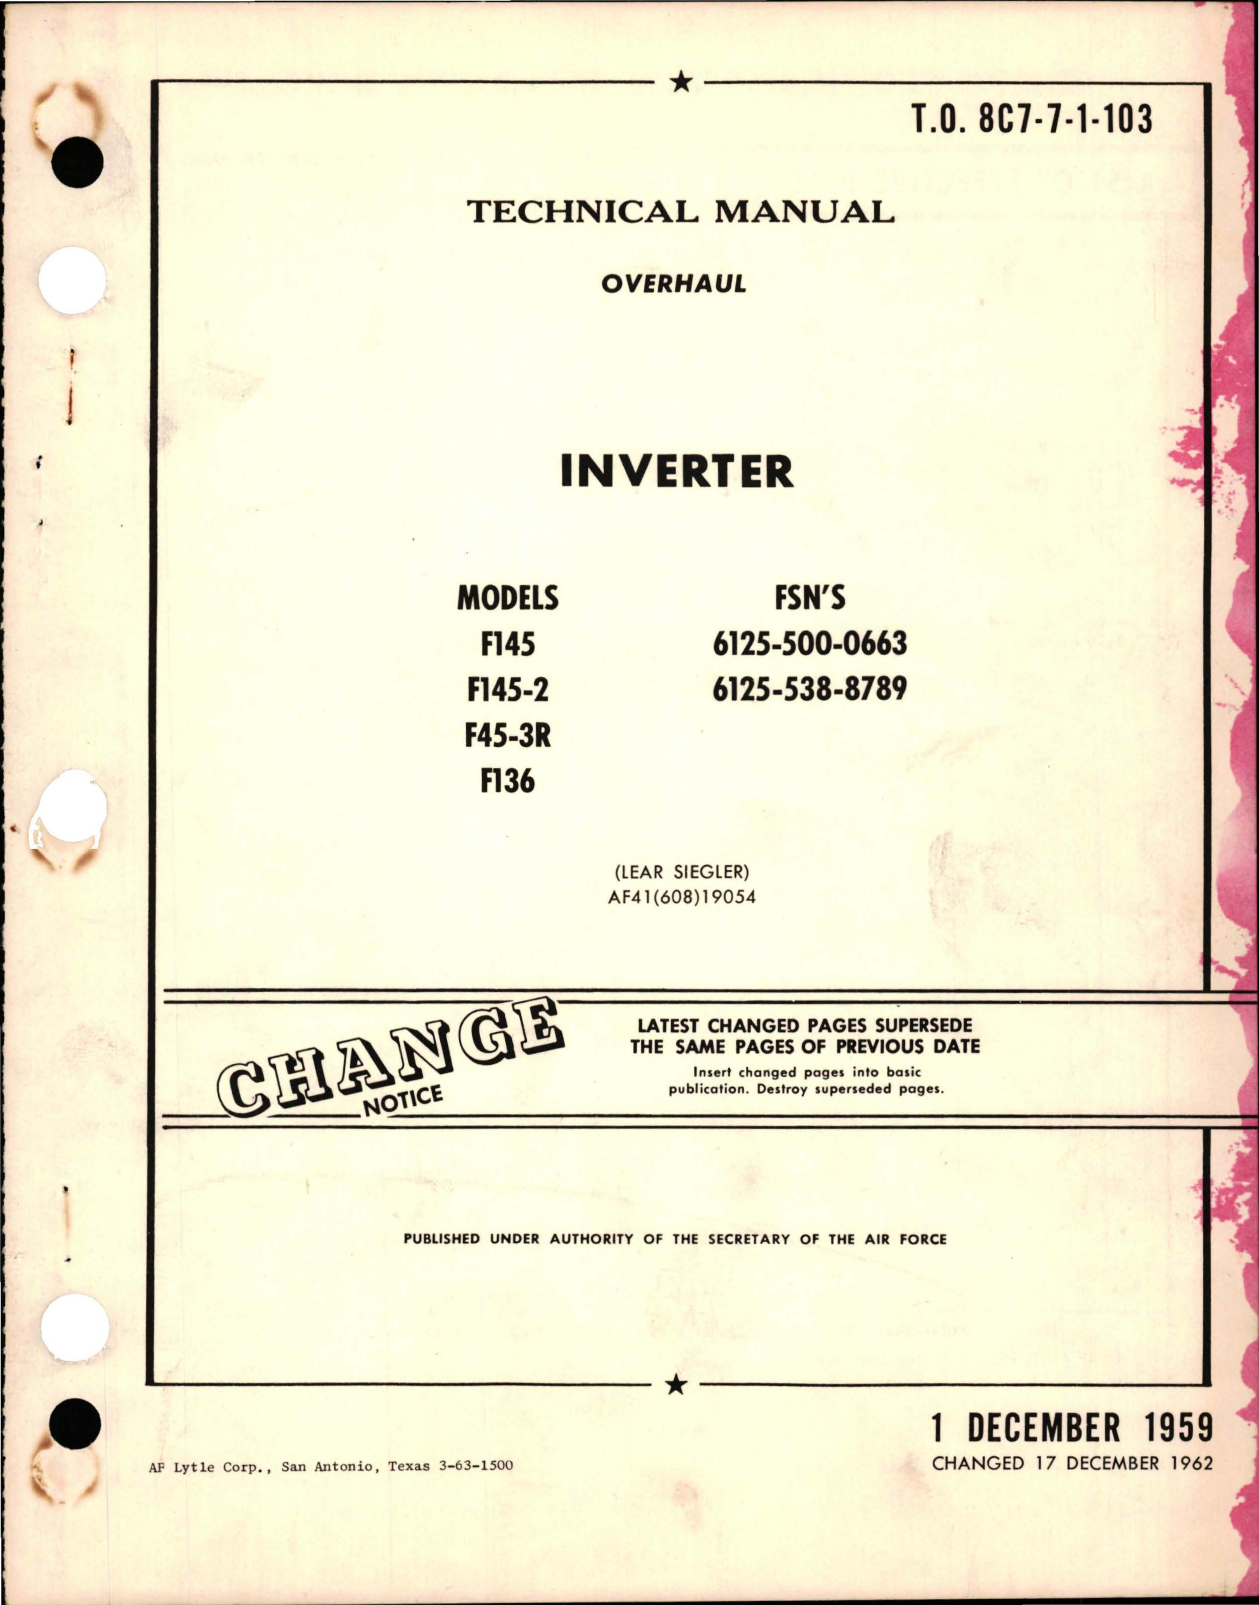 Sample page 1 from AirCorps Library document: Overhaul Manual for Inverter - Models F145, F145-2, F45-3R, and F136